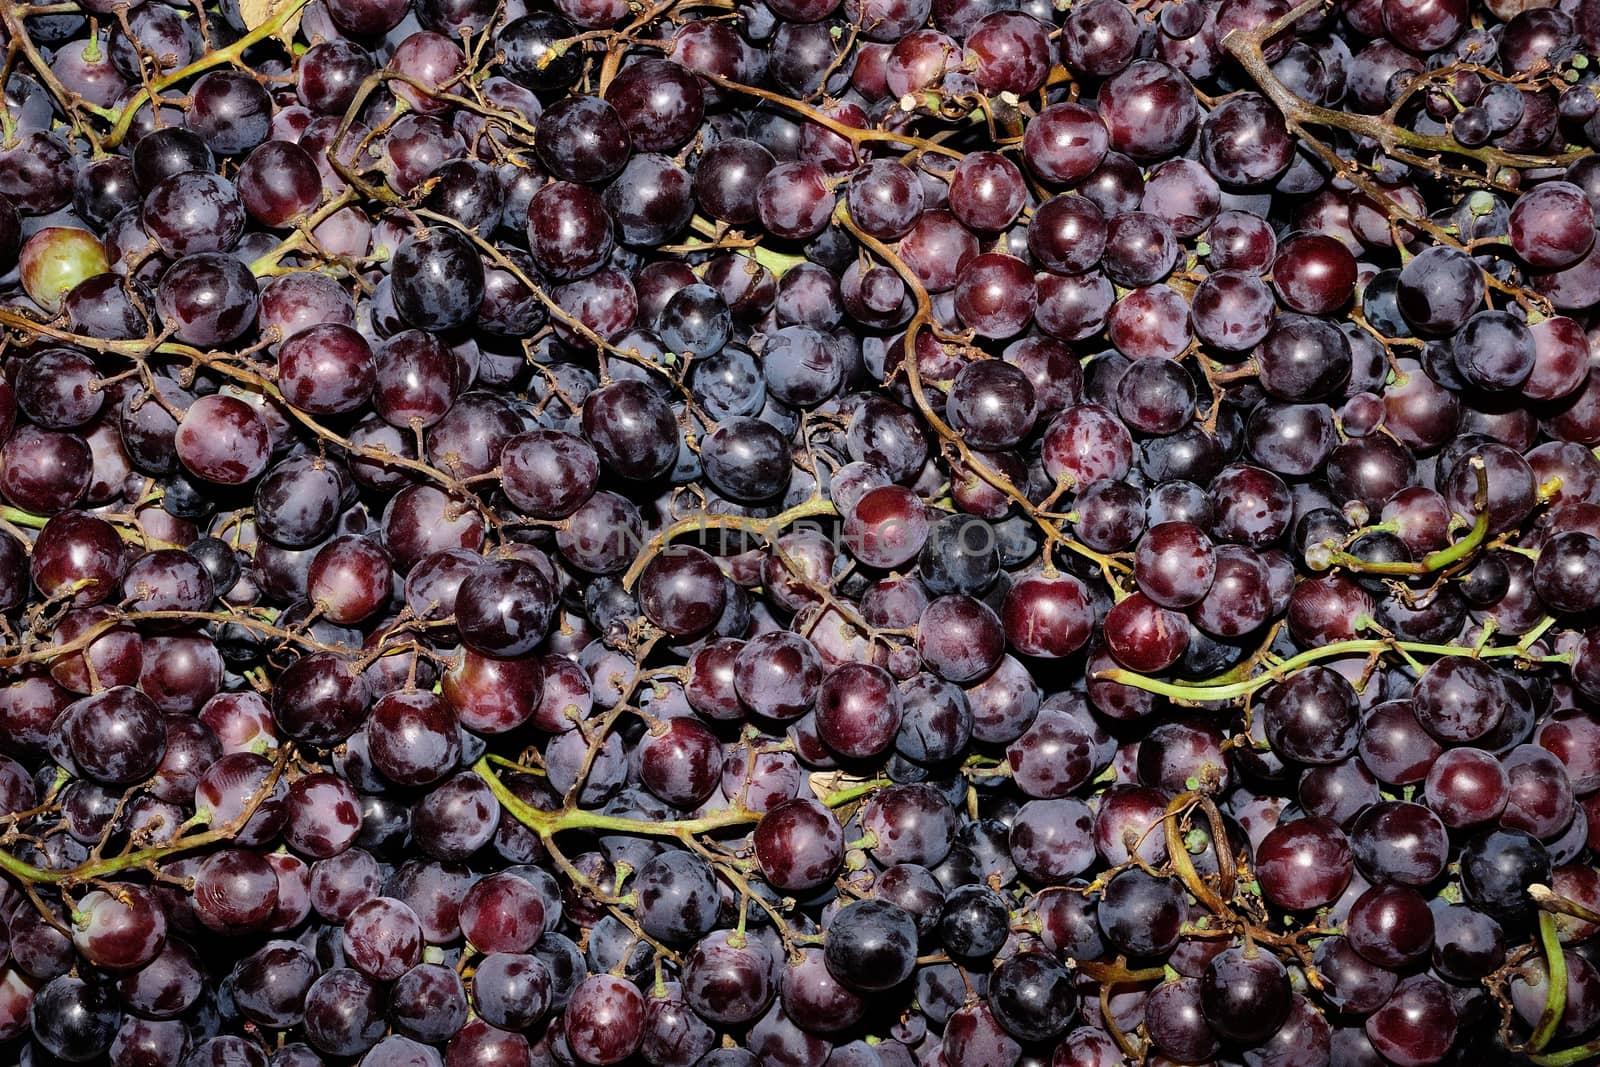 Grape berries, fruit of the middle band, for food, for making wine, juices, jam, alcohol.